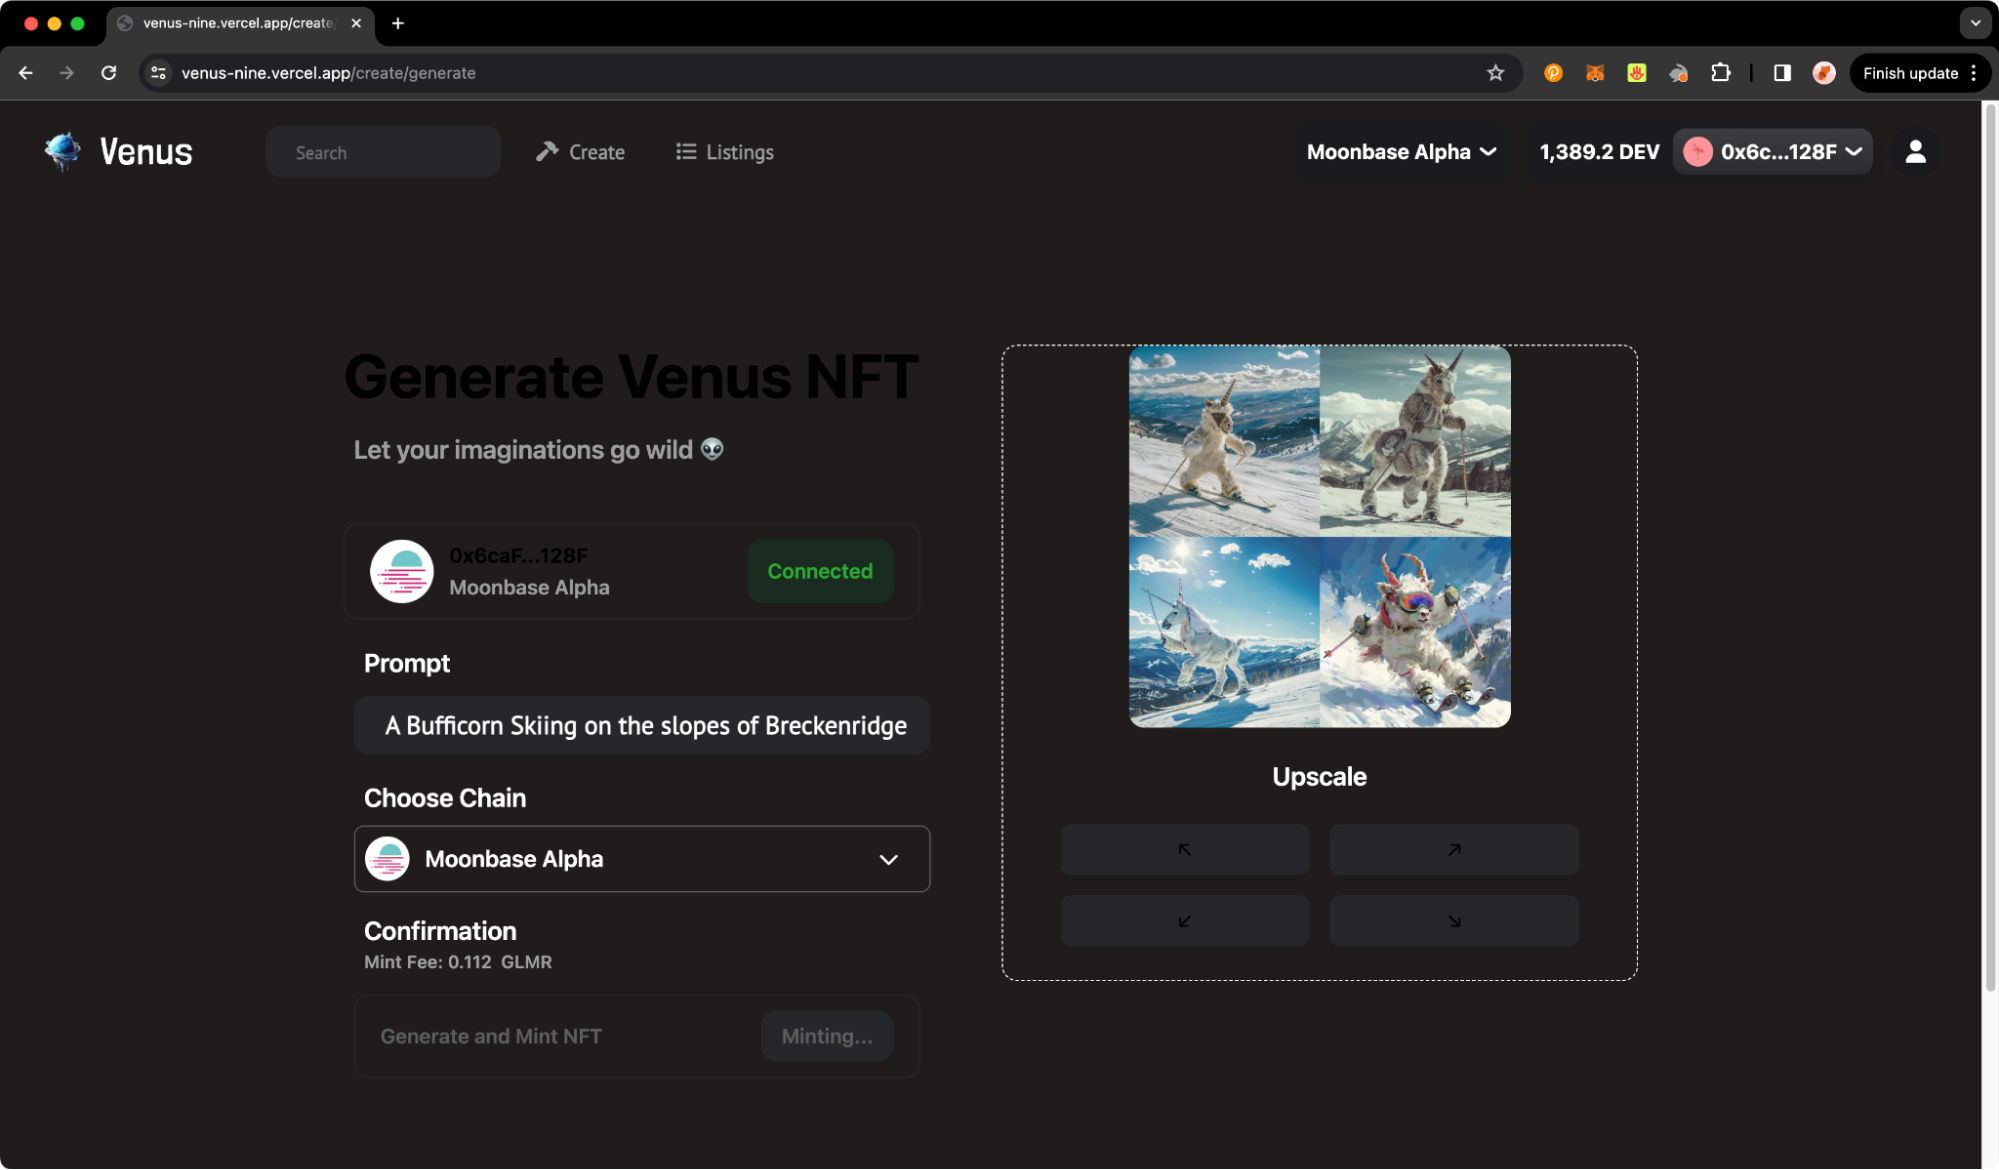 Venus cross-chain NFT marketplace on Moonbeam, with options to generate NFTs via AI prompts and trade them seamlessly across Ethereum, Polygon and other chains